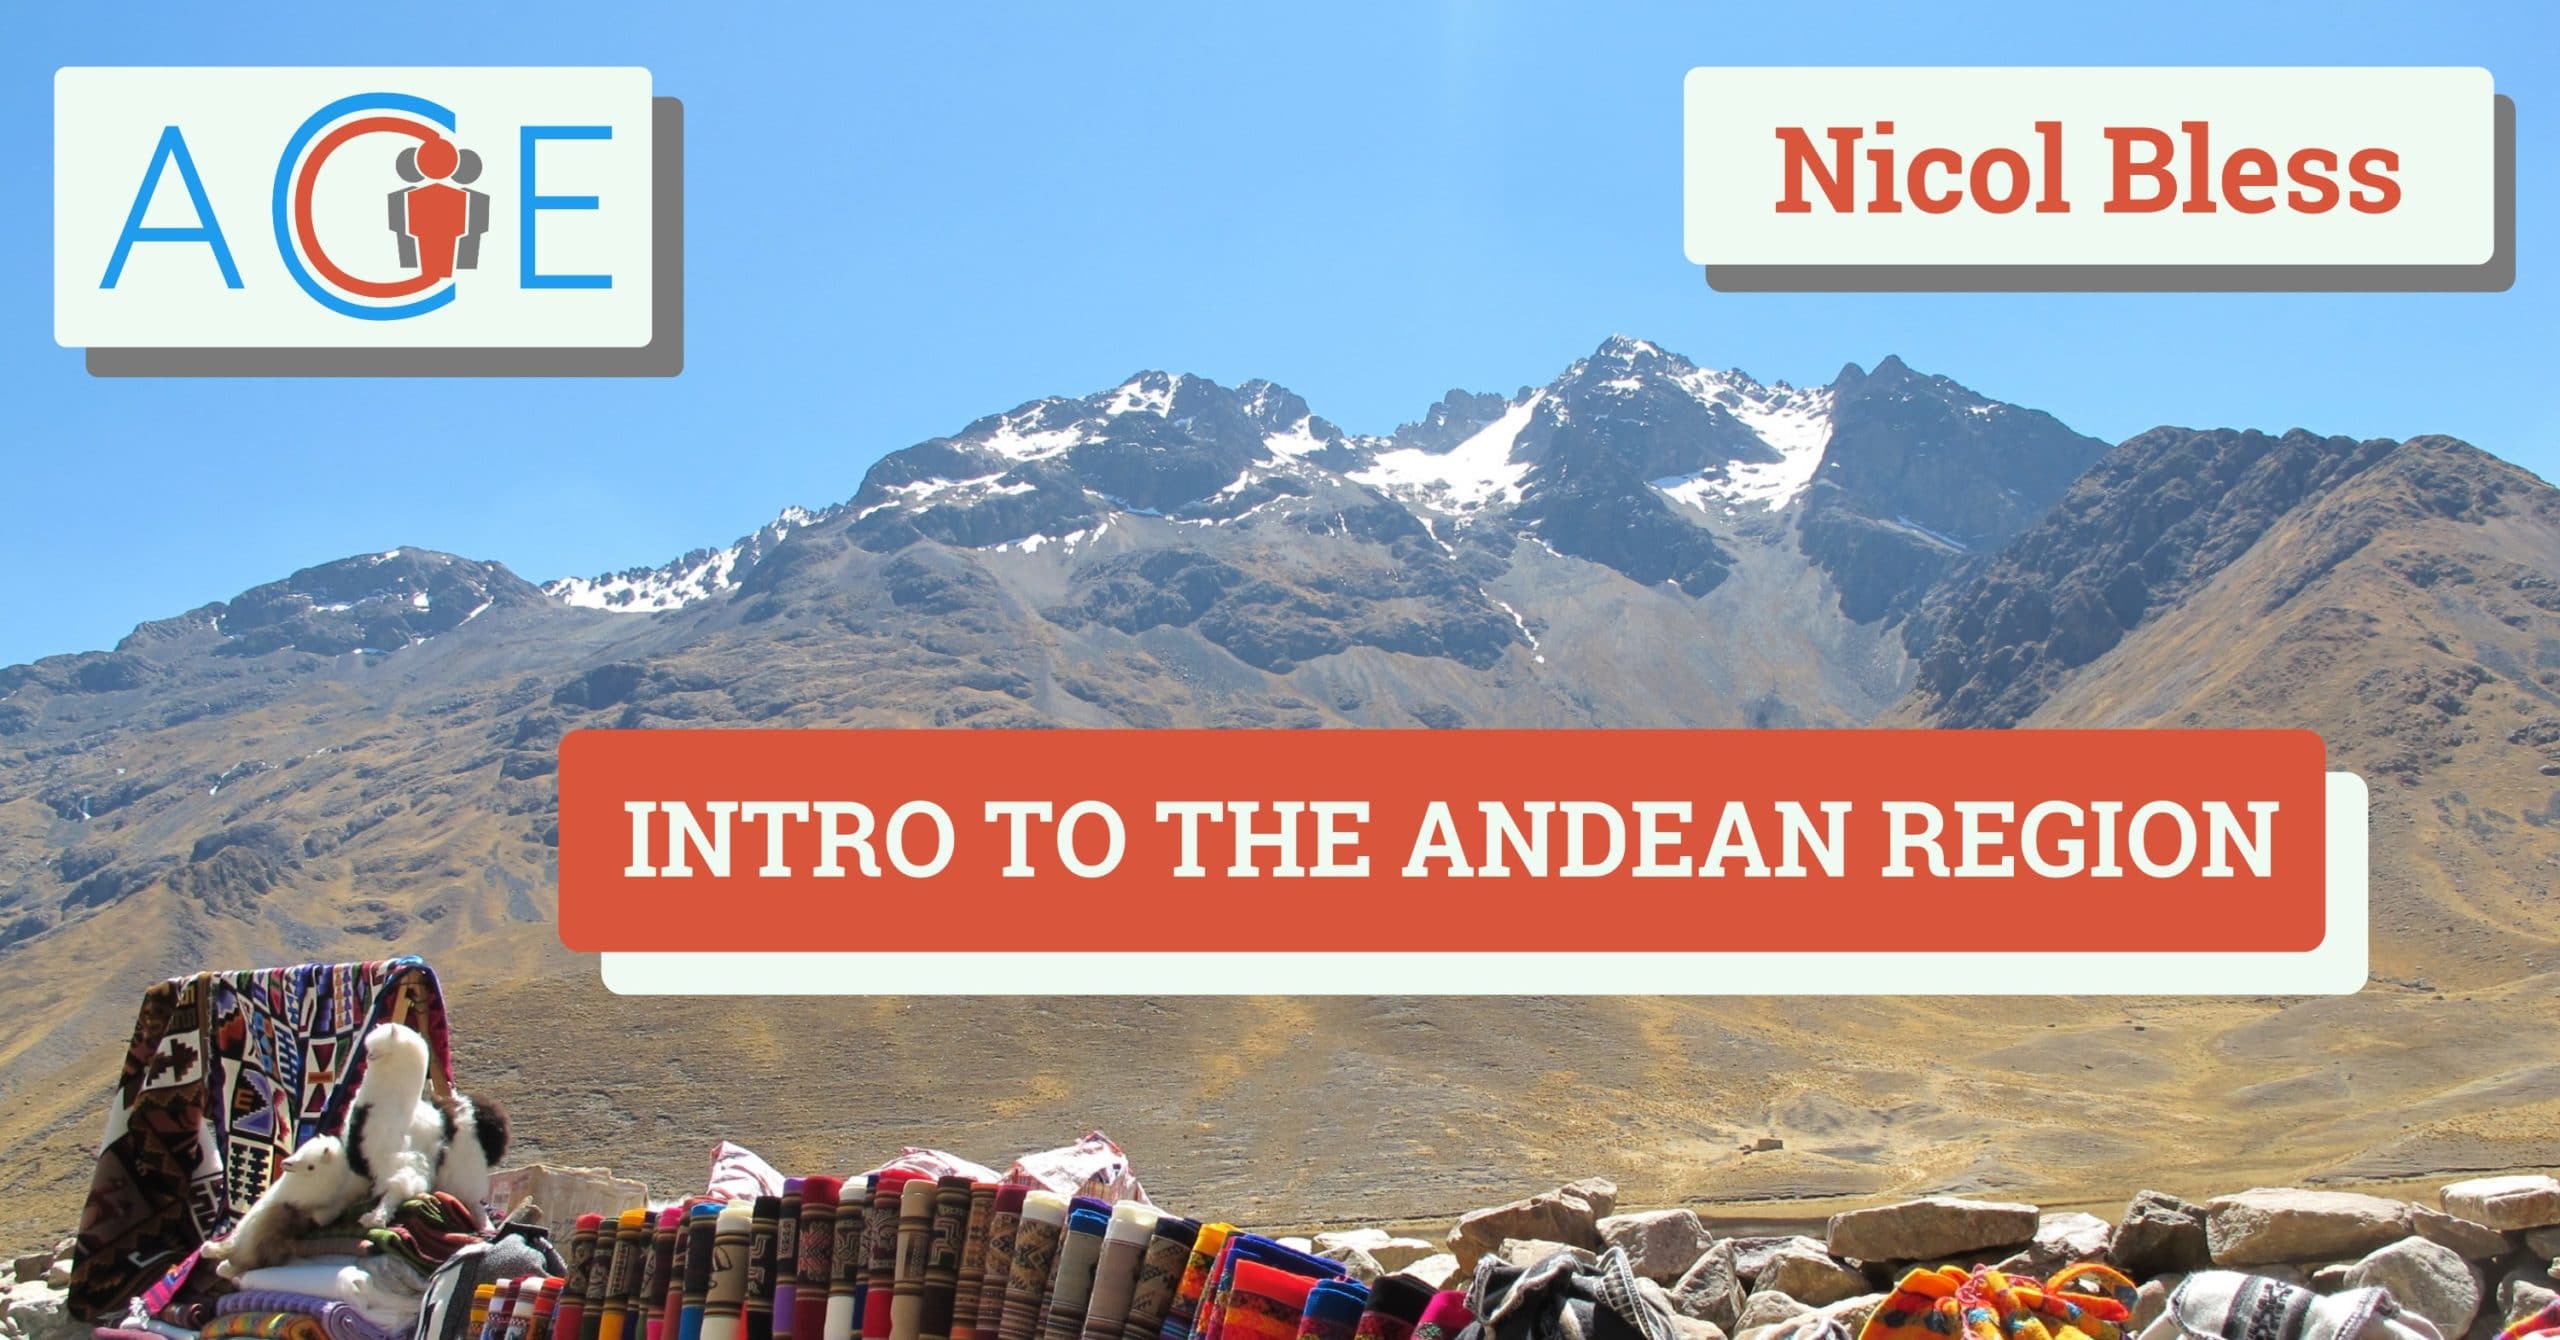 Intro-to-the-Andean-Region-2-scaled.jpg